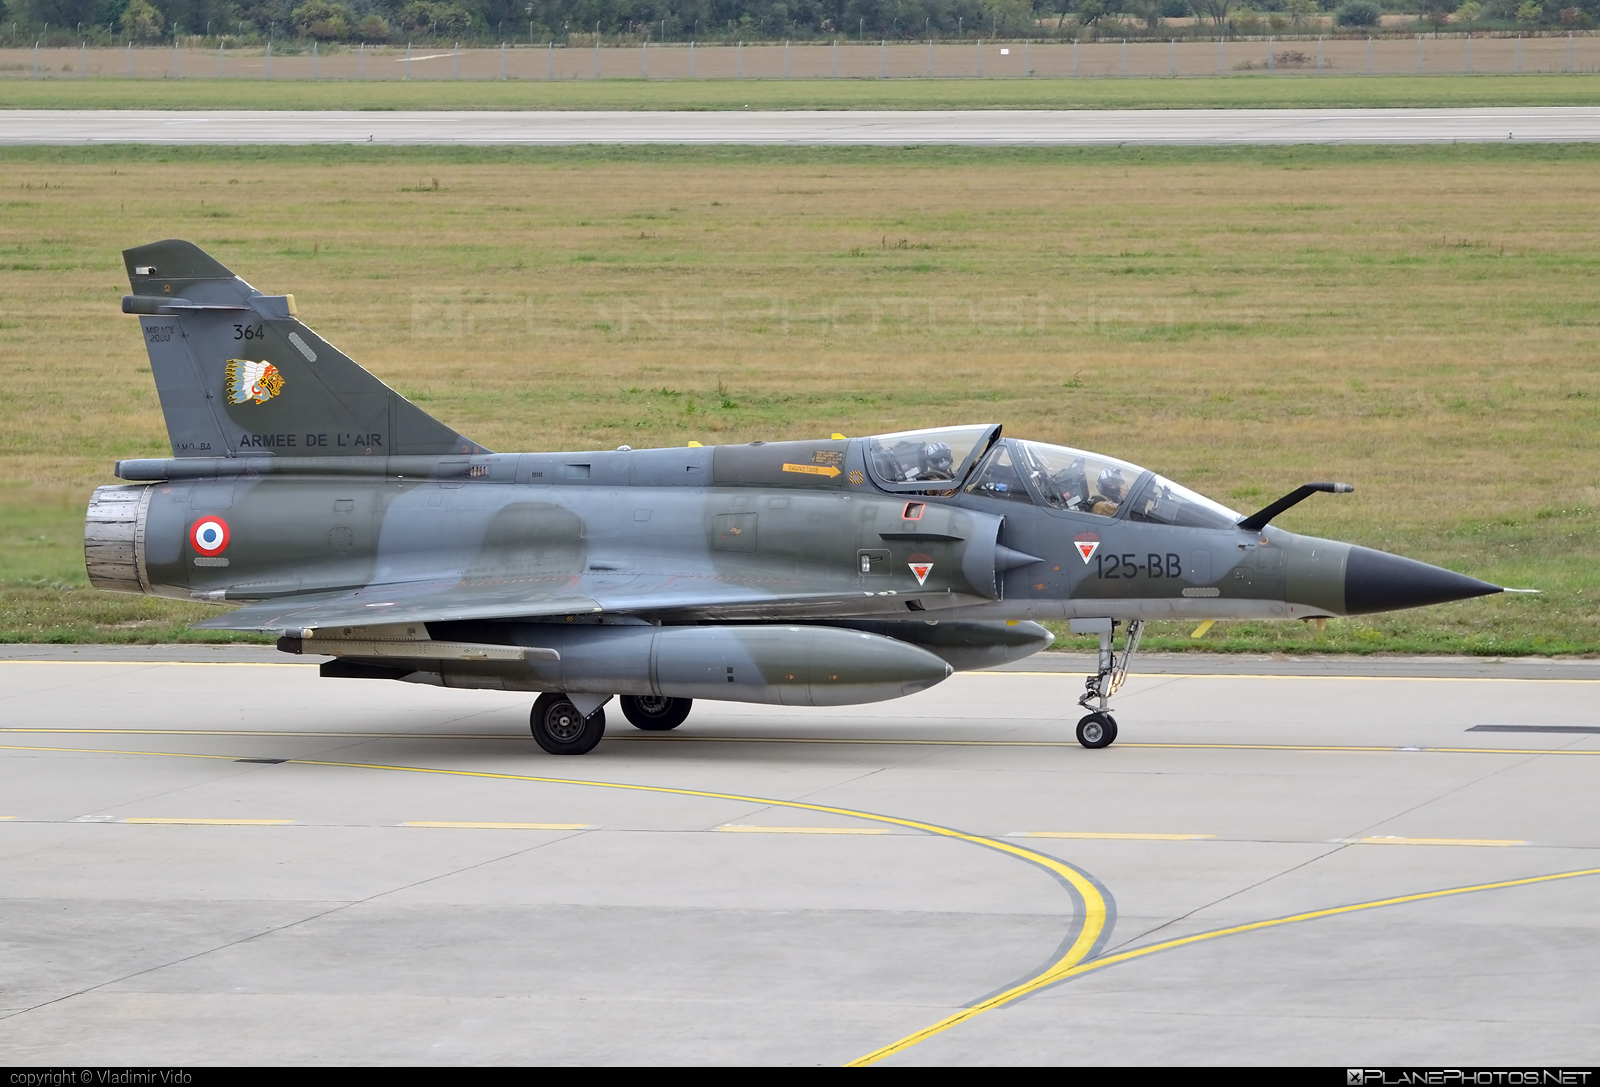 Dassault Mirage 2000N - 364 operated by Armée de l´Air (French Air Force) #DassaultMirage #DassaultMirage2000 #DassaultMirage2000n #armeedelair #dassault #frenchairforce #mirage #mirage2000 #mirage2000n #natodays #natodays2015